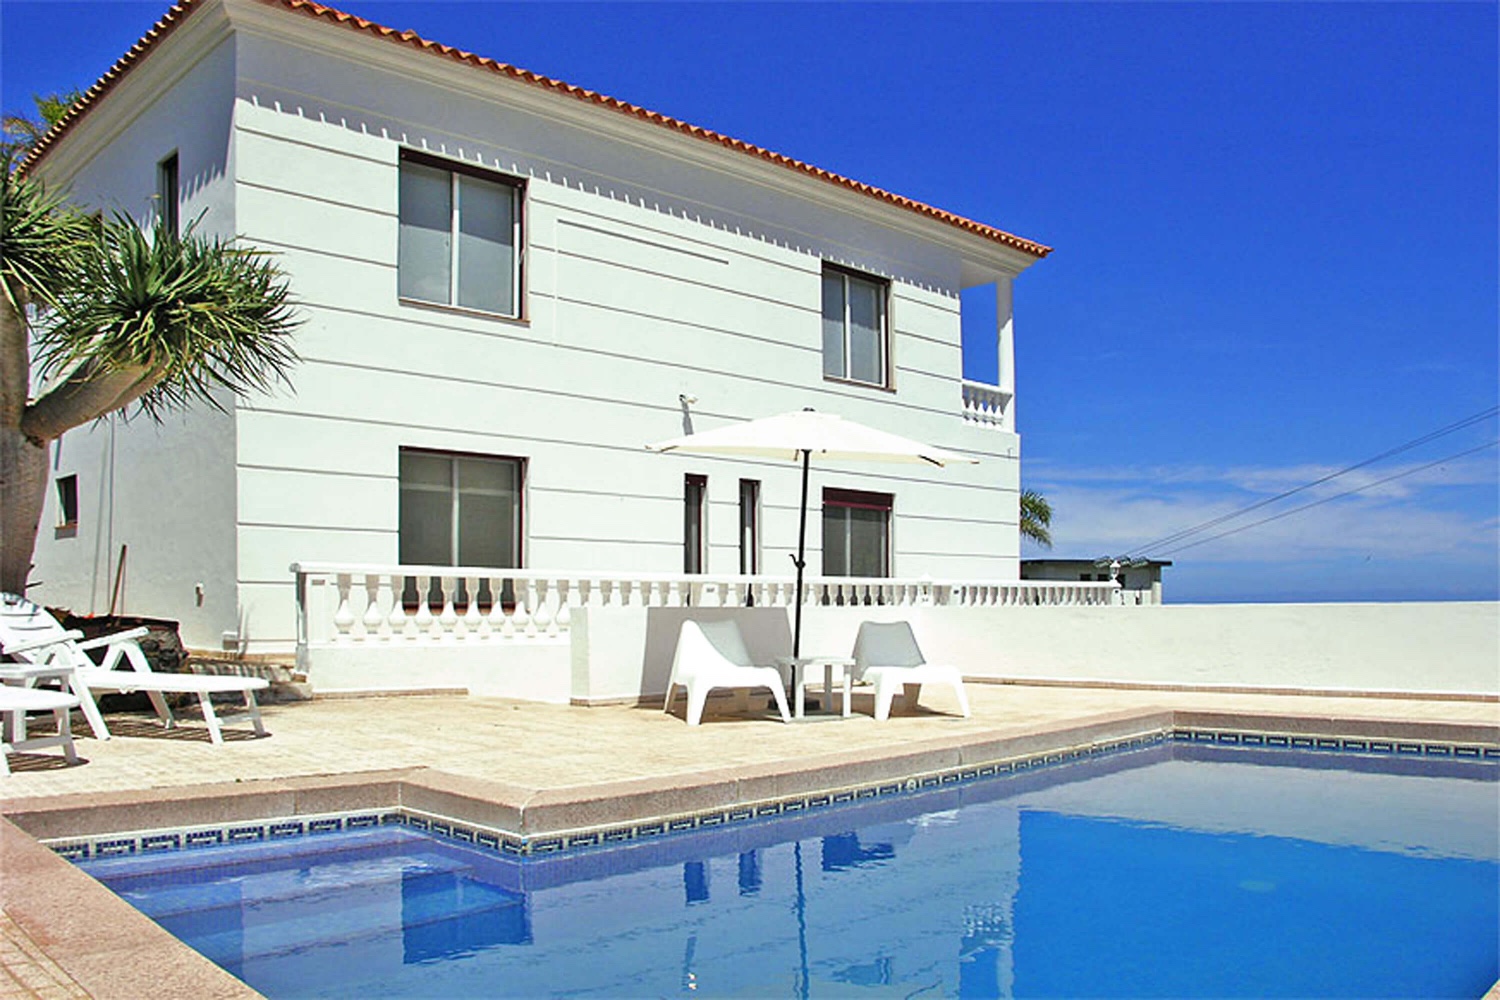 Modern holiday home to rent with a large outdoor area to enjoy a holiday in Santa Ursula in the north of Tenerife